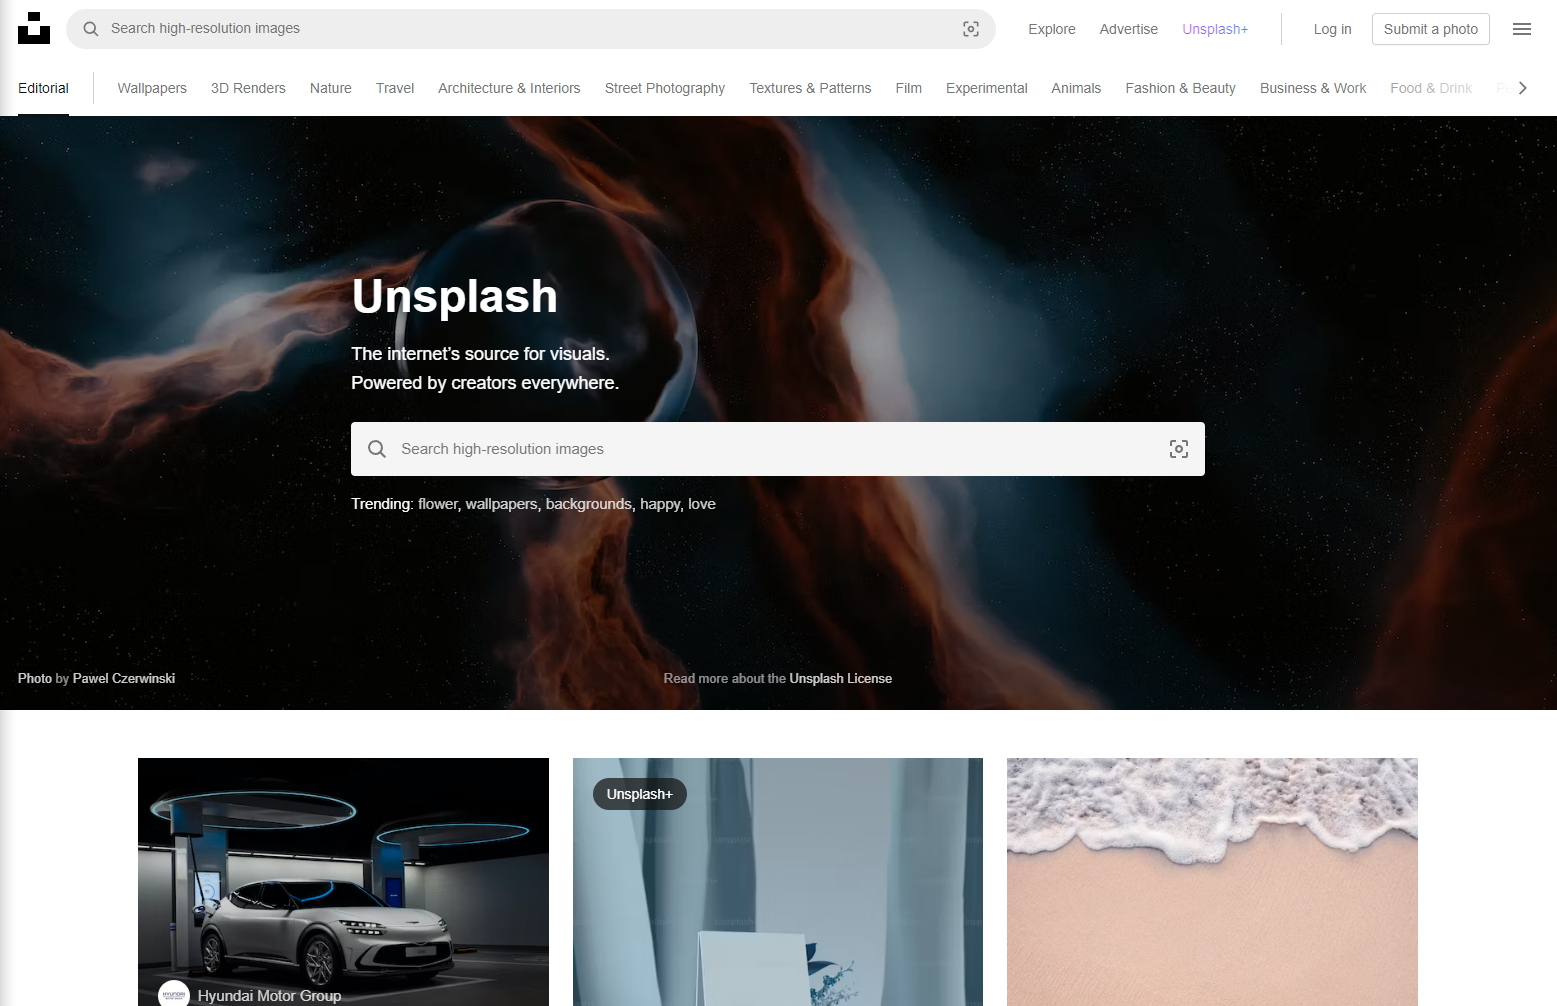 The free tool Unsplash's home page. 